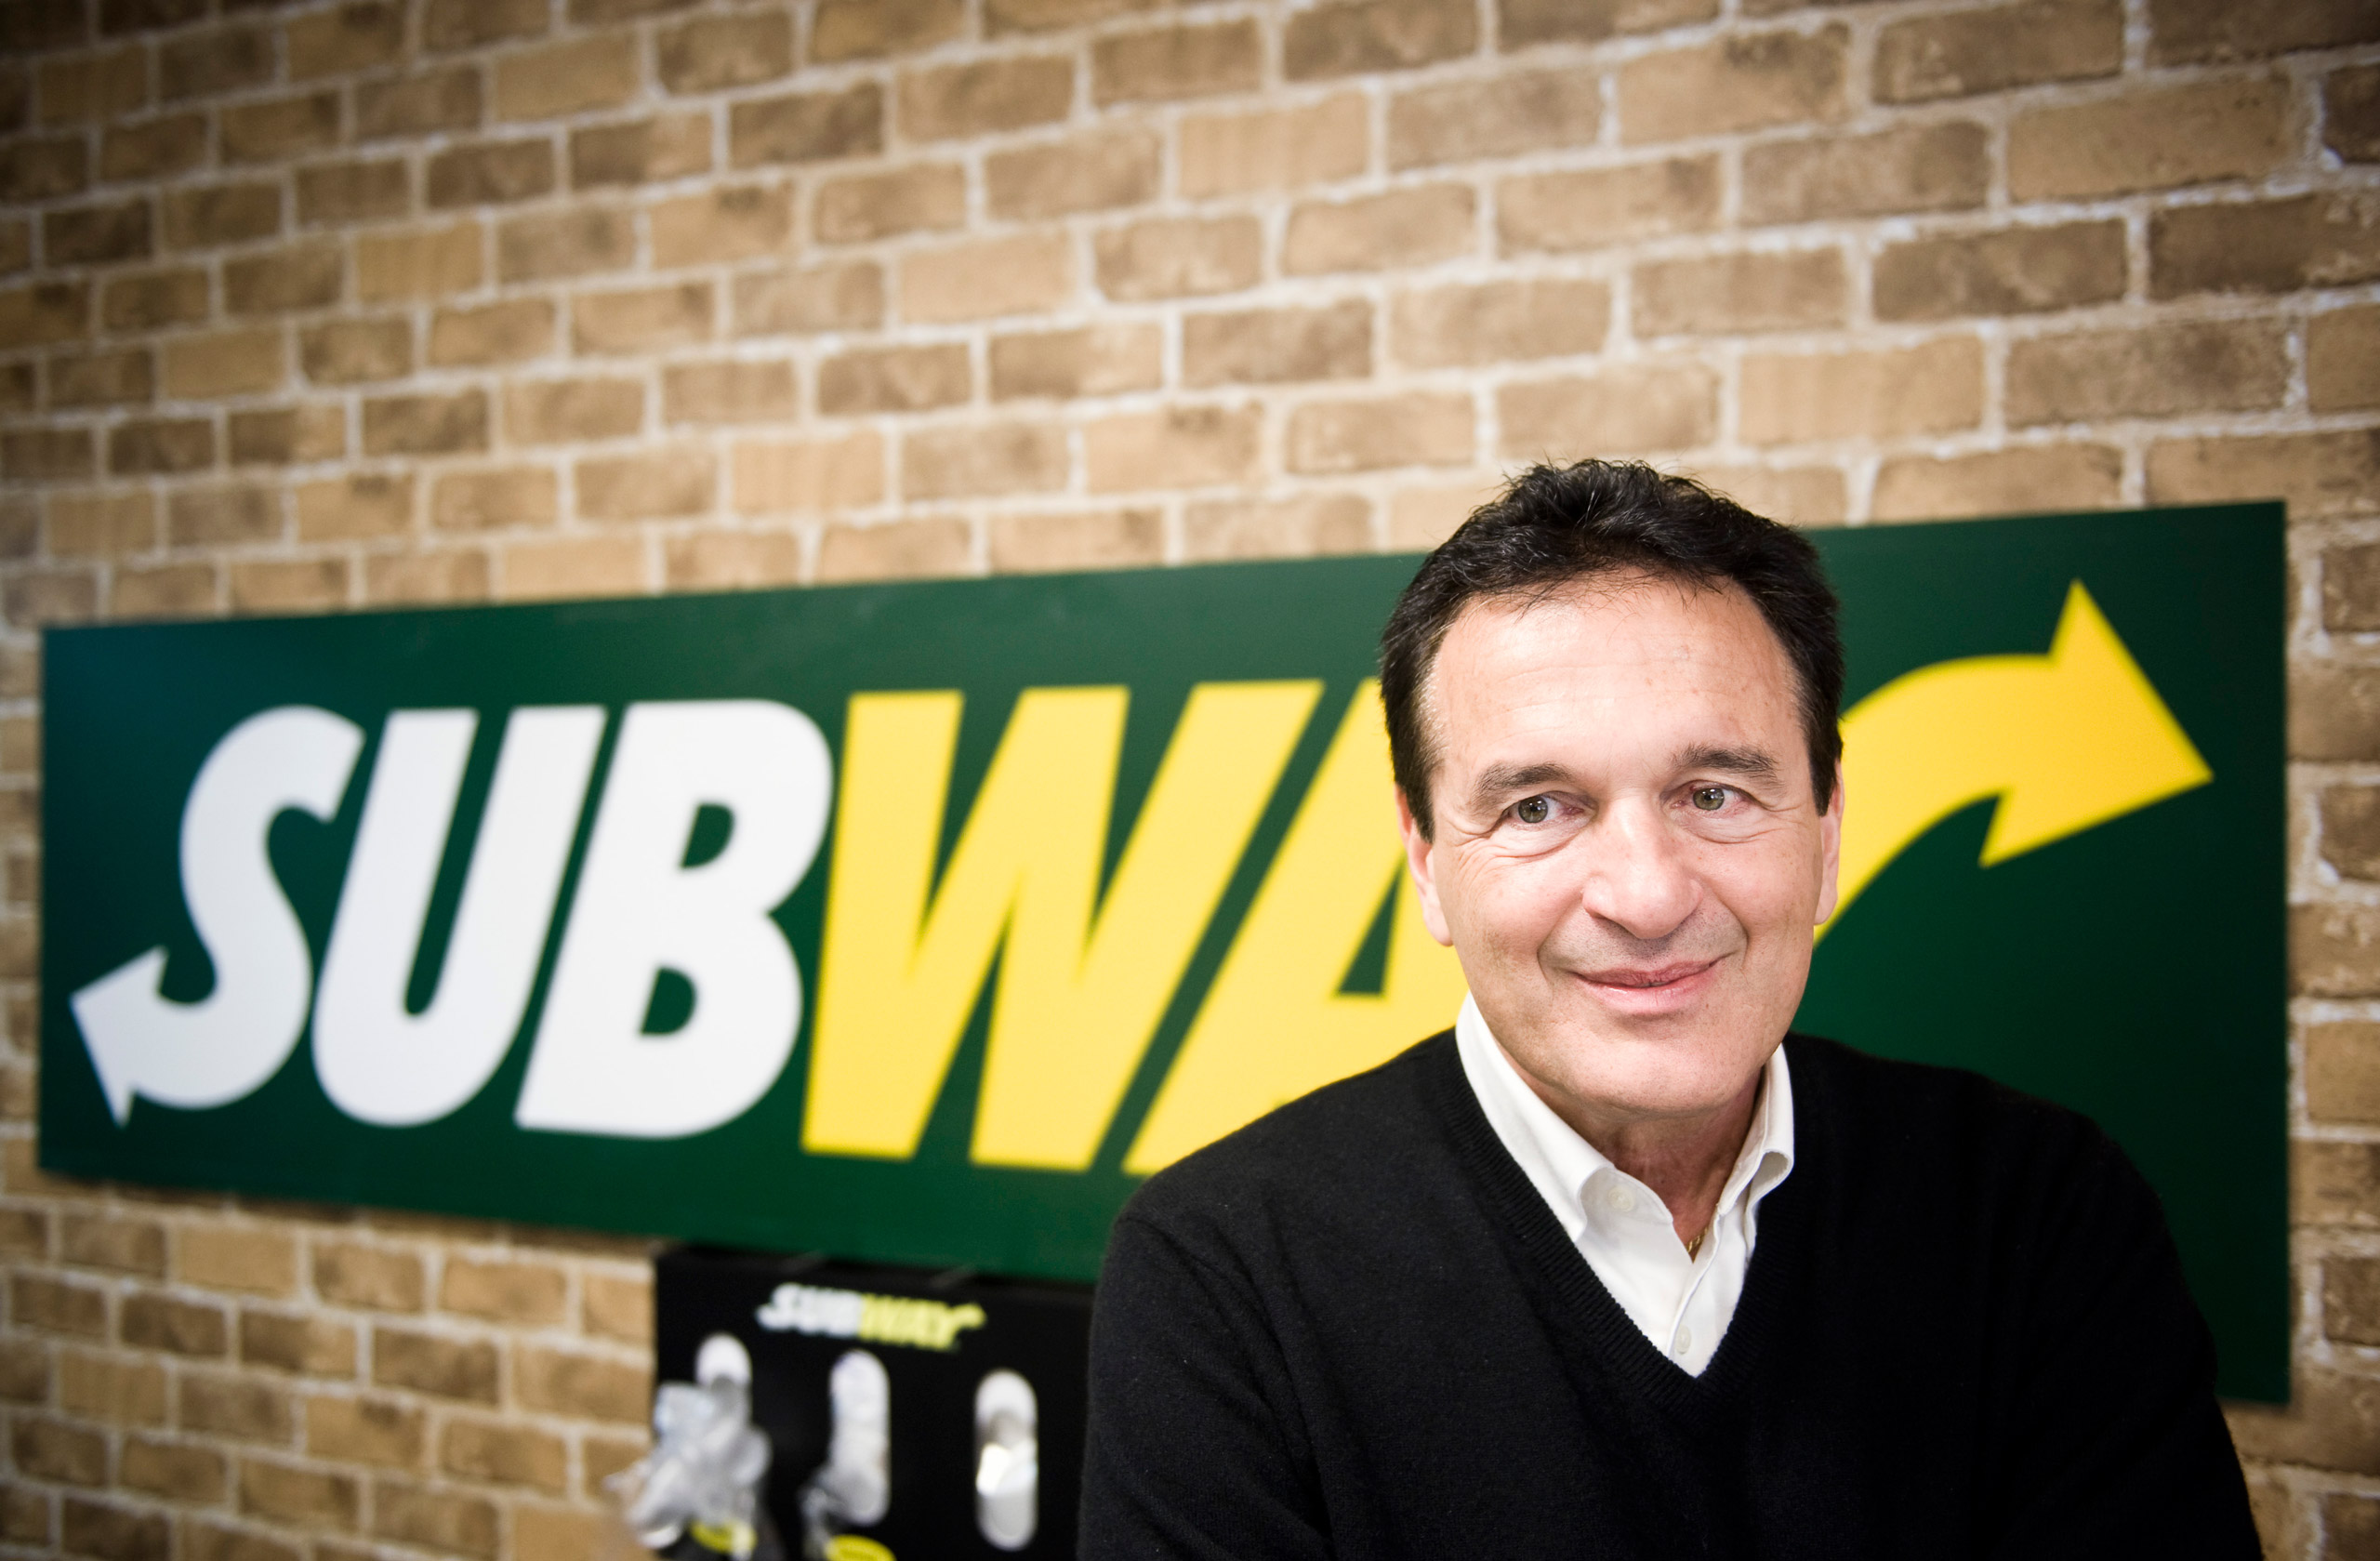 Fred DeLuca, President and founder of sandwich maker Subway, smiles during an interview in a Subway restaurant at "Solna Centrum" in Stockholm on March 10, 2011.  The self-made billionaire who heads up sandwich maker Subway, now the world's largest fast food chain in terms of restaurants, never thought his operation would become bigger than McDonald's.   "It was just a way to pay my way through college," Fred DeLuca, who started his business at age 17, told AFP at a newly opened restaurant in Stockholm on March 10.  AFP PHOTO/JONATHAN NACKSTRAND (Photo credit should read JONATHAN NACKSTRAND/AFP/Getty Images)